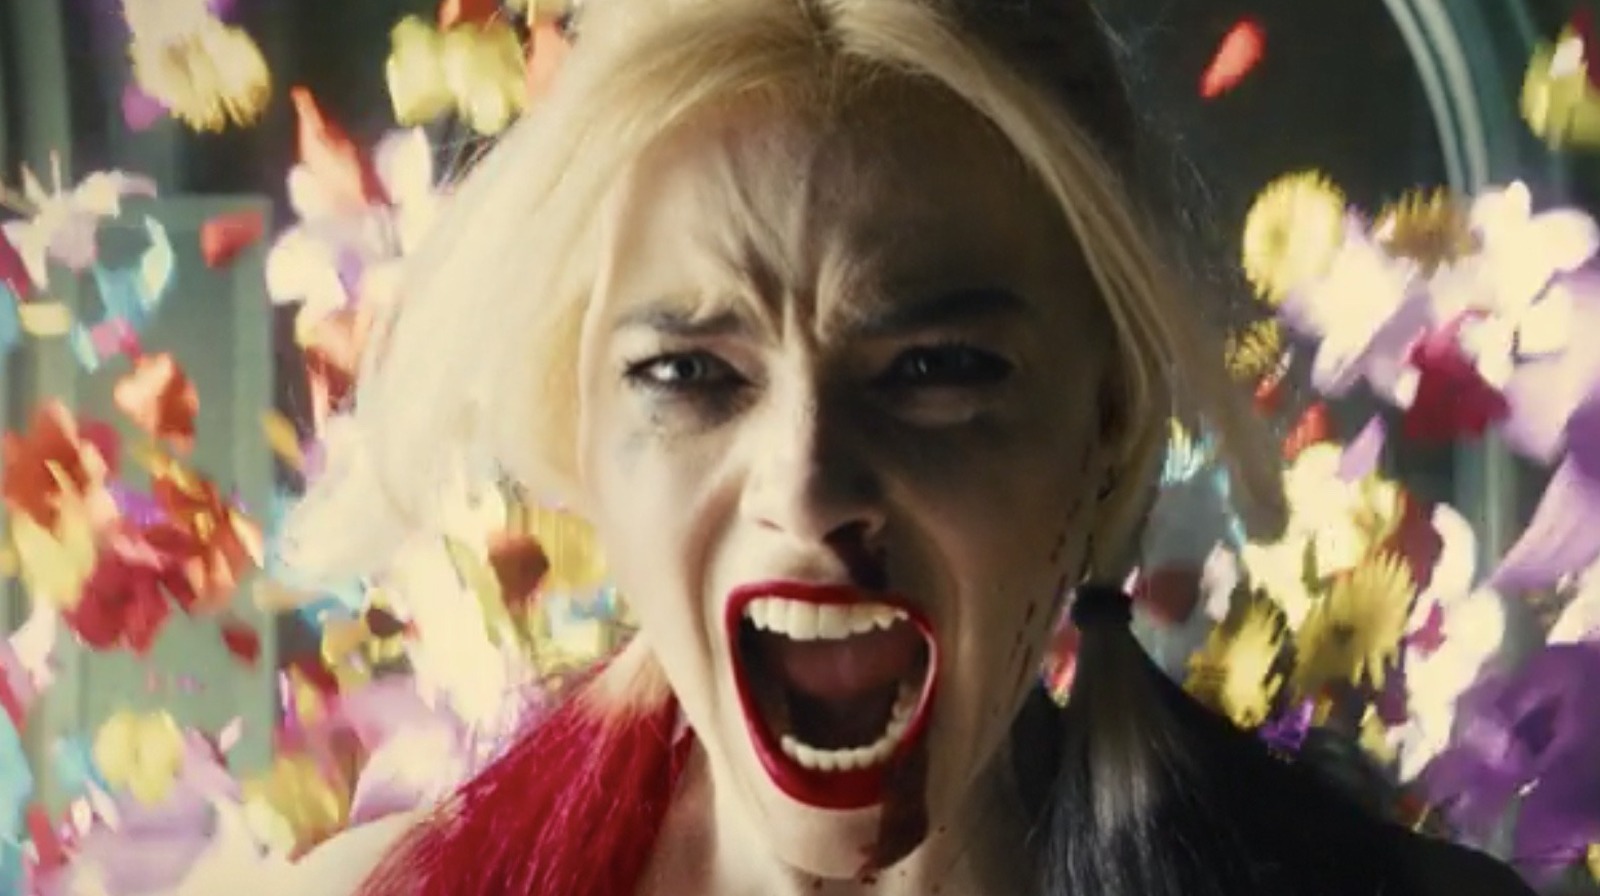 Lollipop Chainsaw Inspired Harley Quinn Scene In 'The Suicide Squad